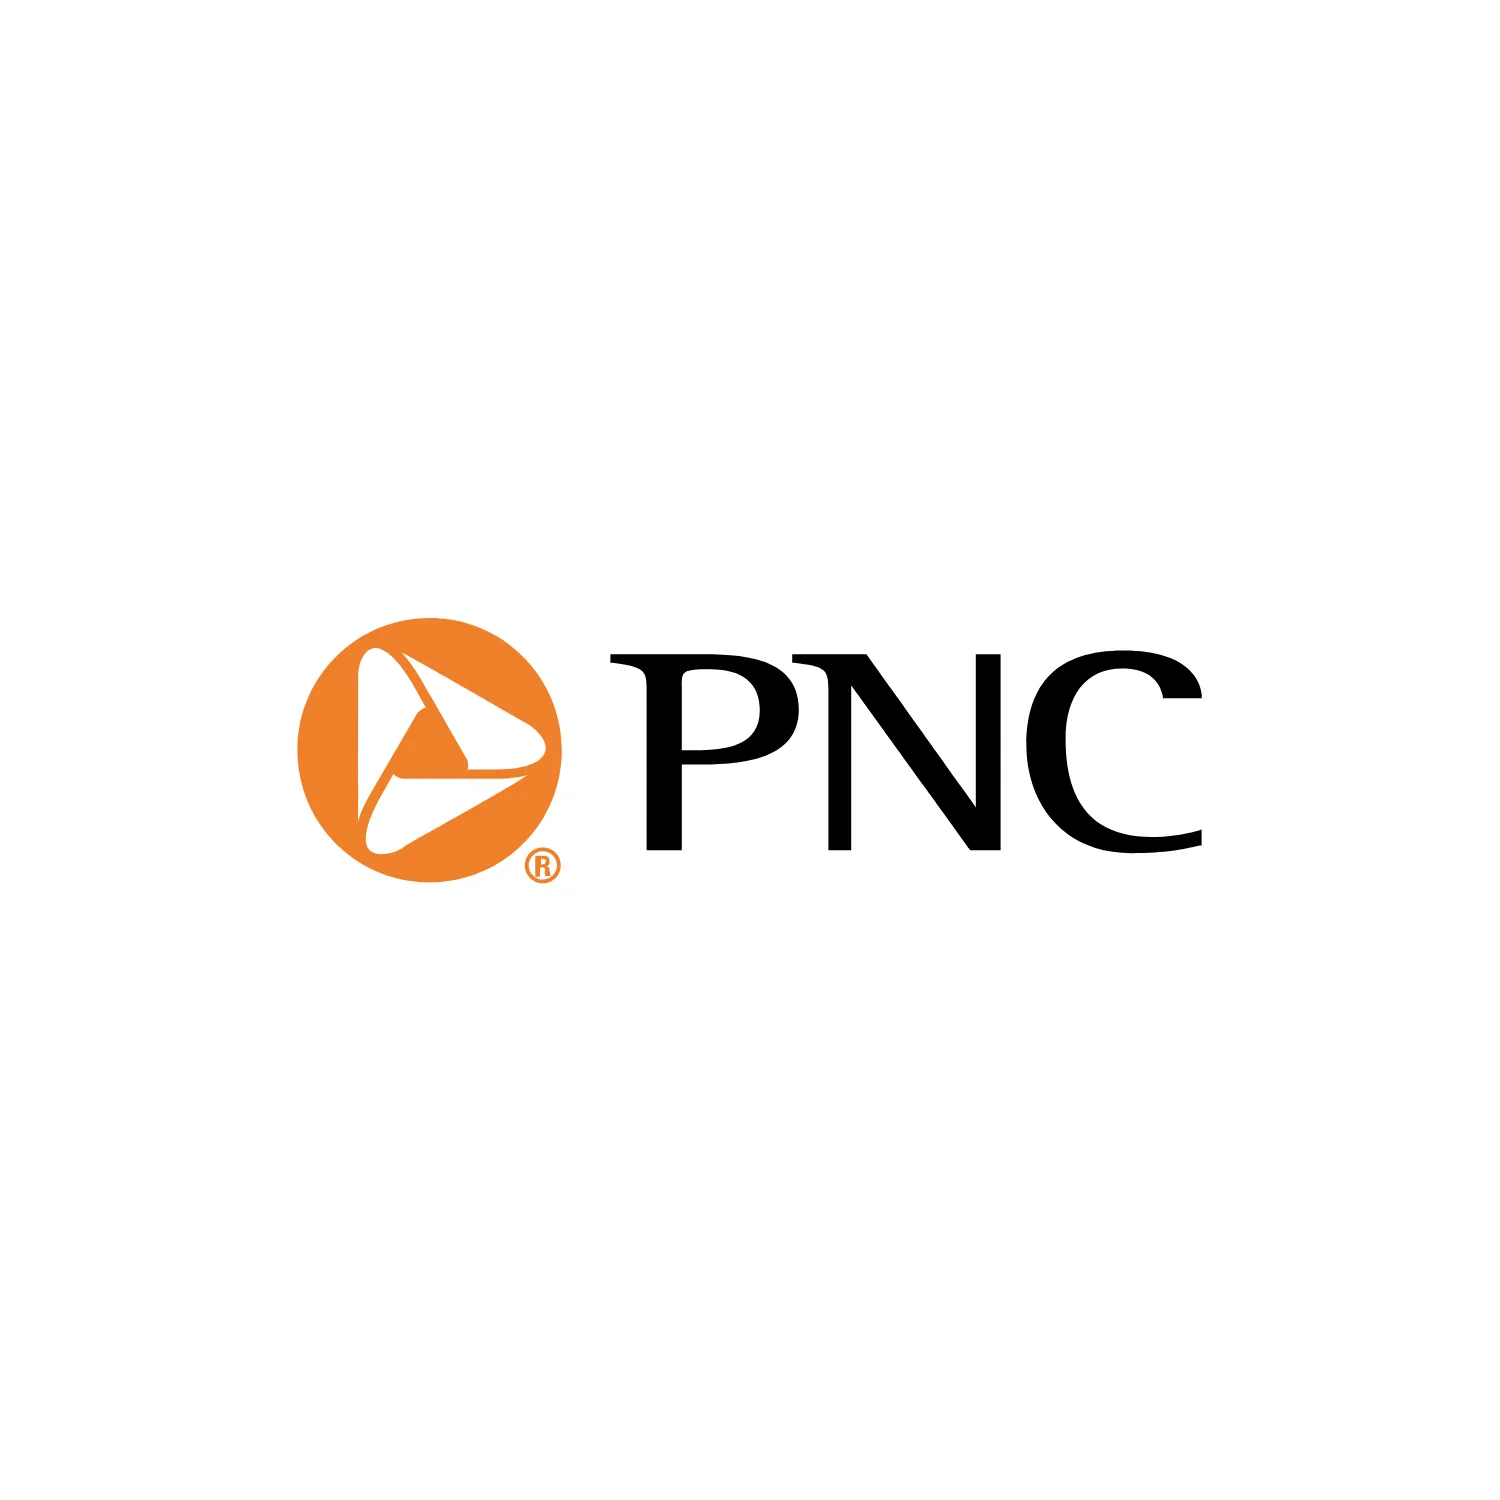 Database of PNC Bank branches and ATM’s Locations in the United States